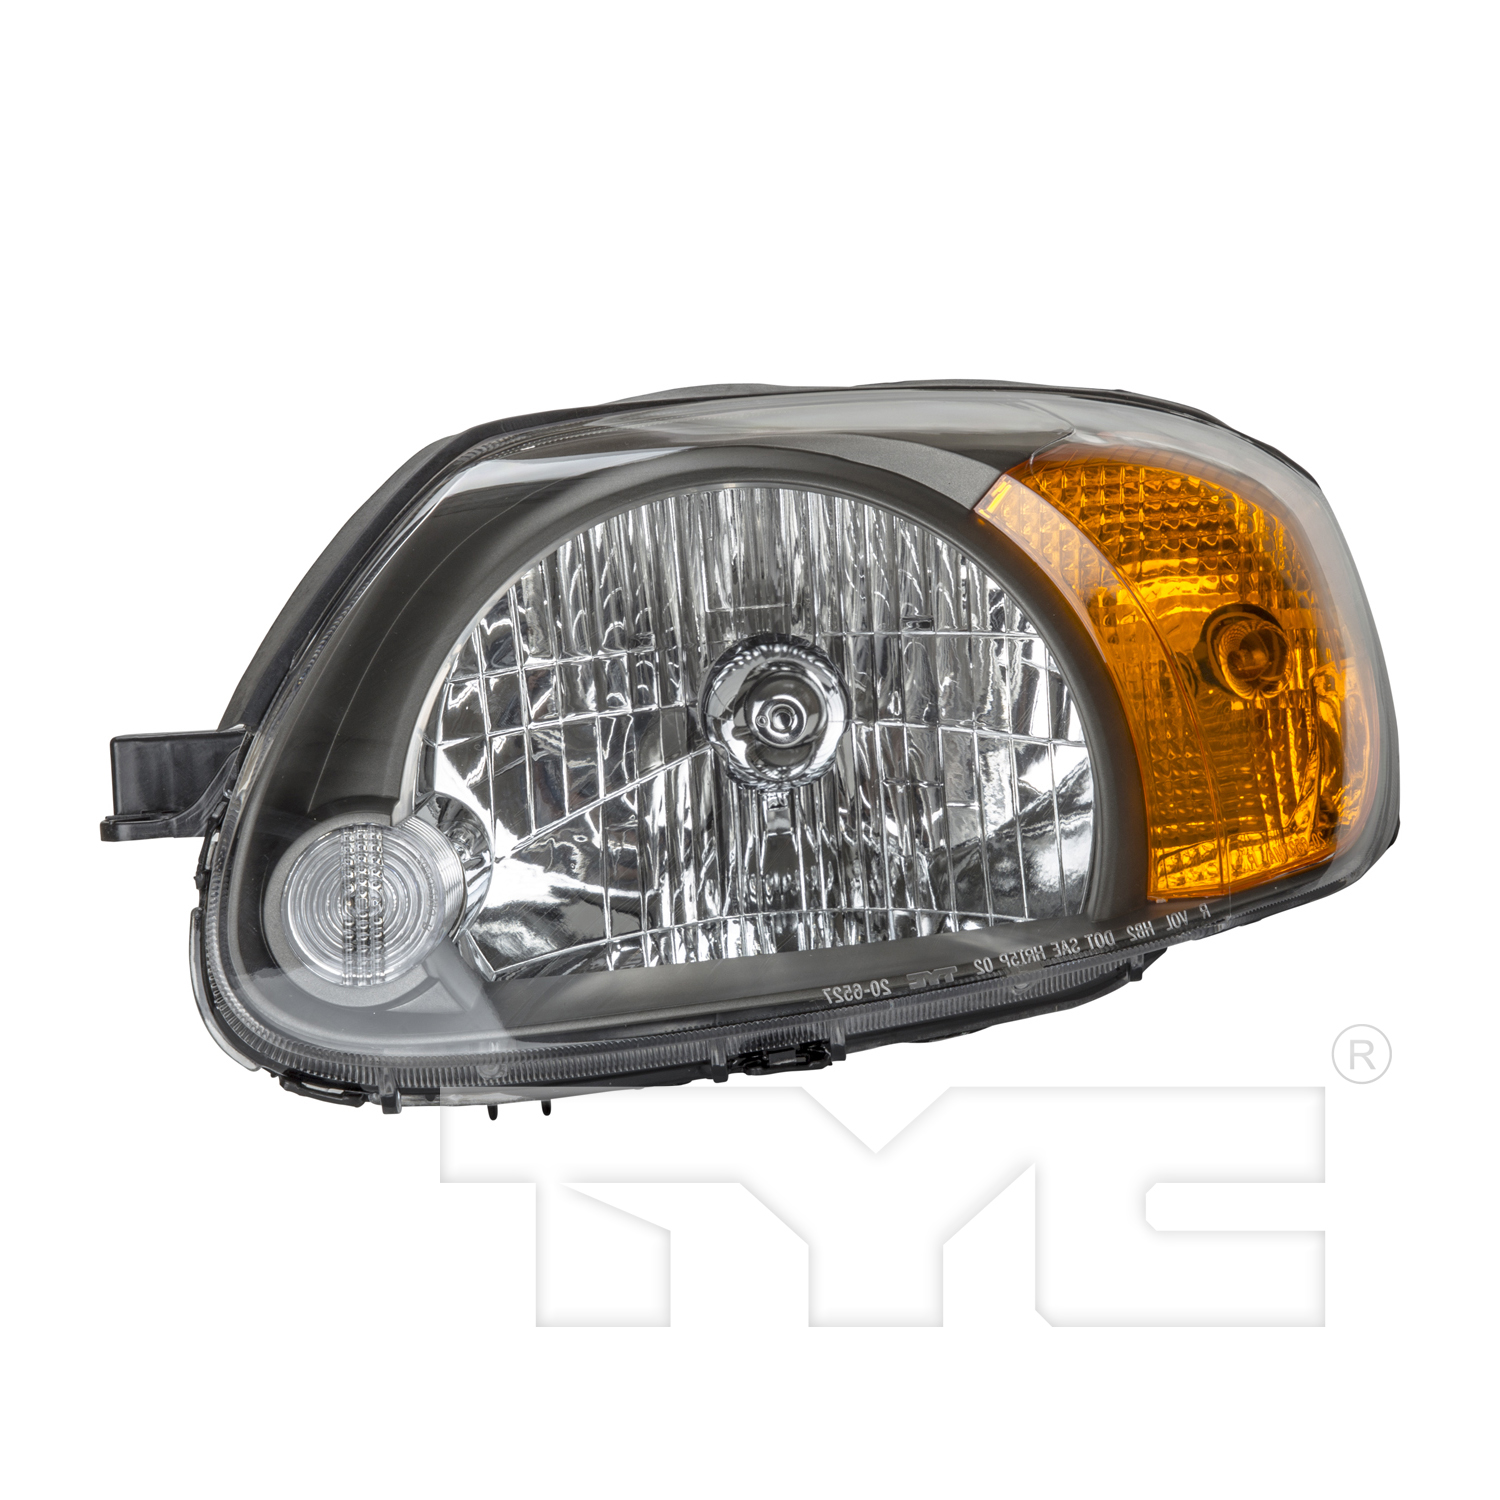 Aftermarket HEADLIGHTS for HYUNDAI - ACCENT, ACCENT,03-06,LT Headlamp assy composite